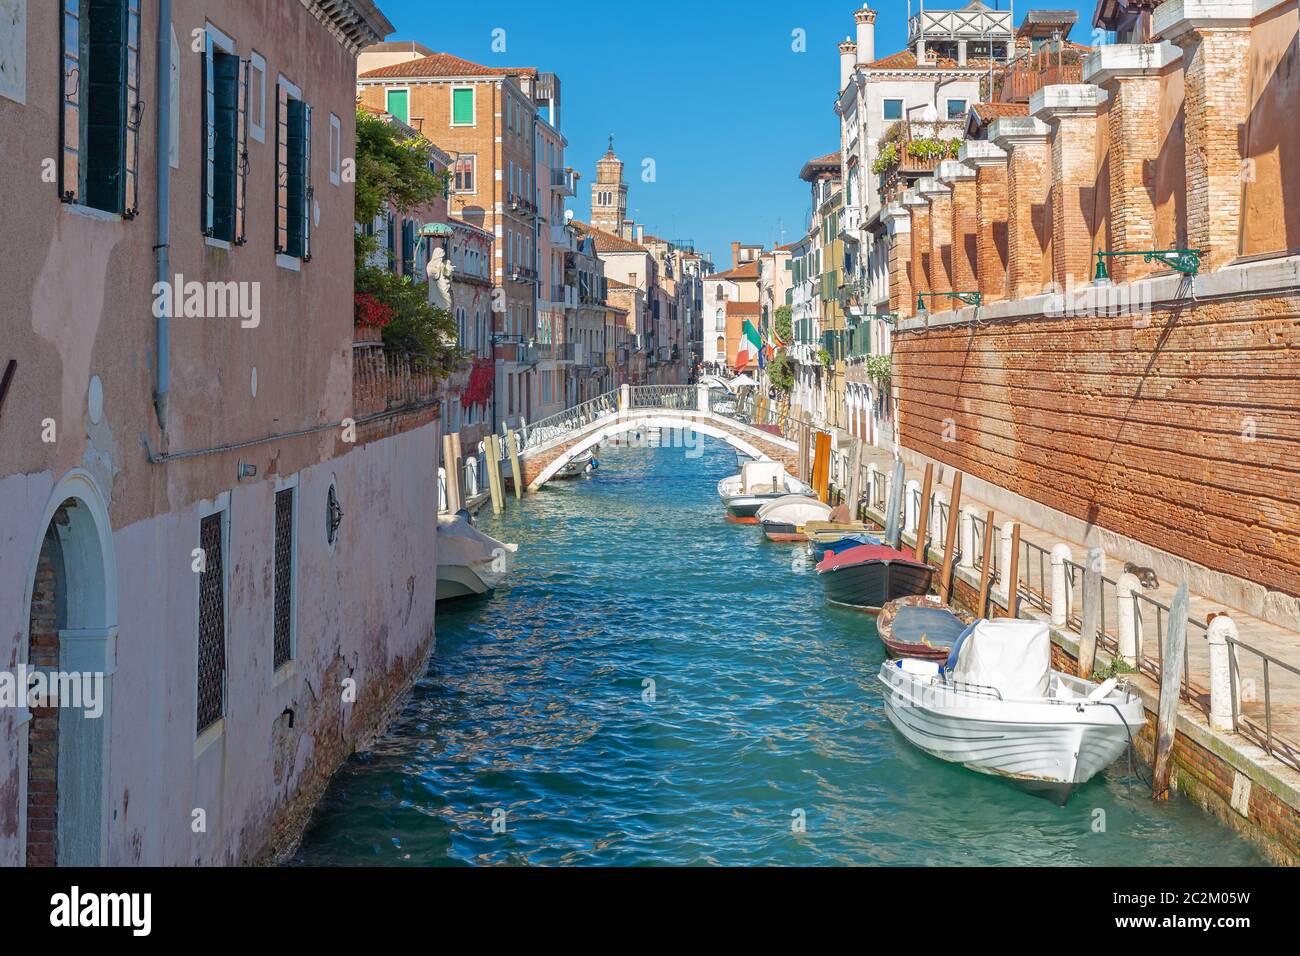 Side canal in Venice Stock Photo